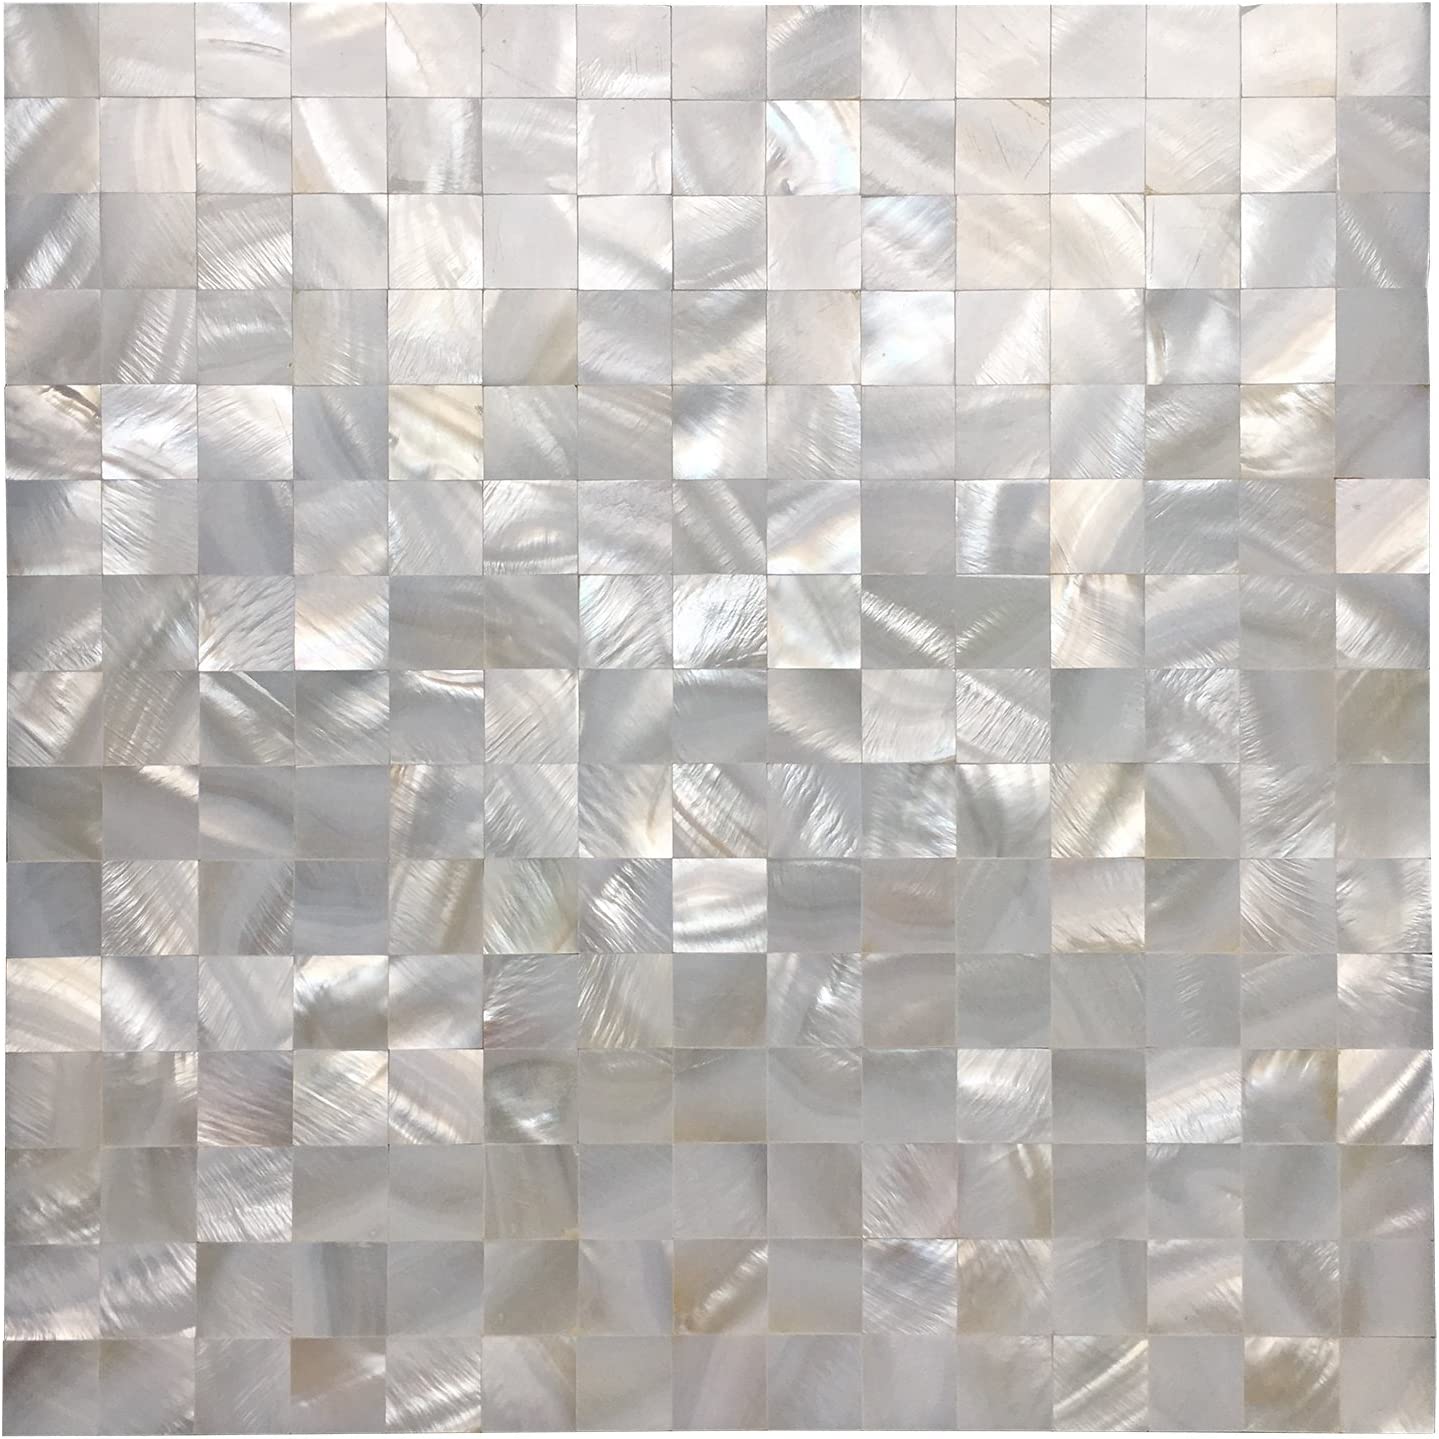 A18691P6 - Peel and Stick Mother of Pearl Shell Mosaic Tile for Kitchen Backsplashes, 12